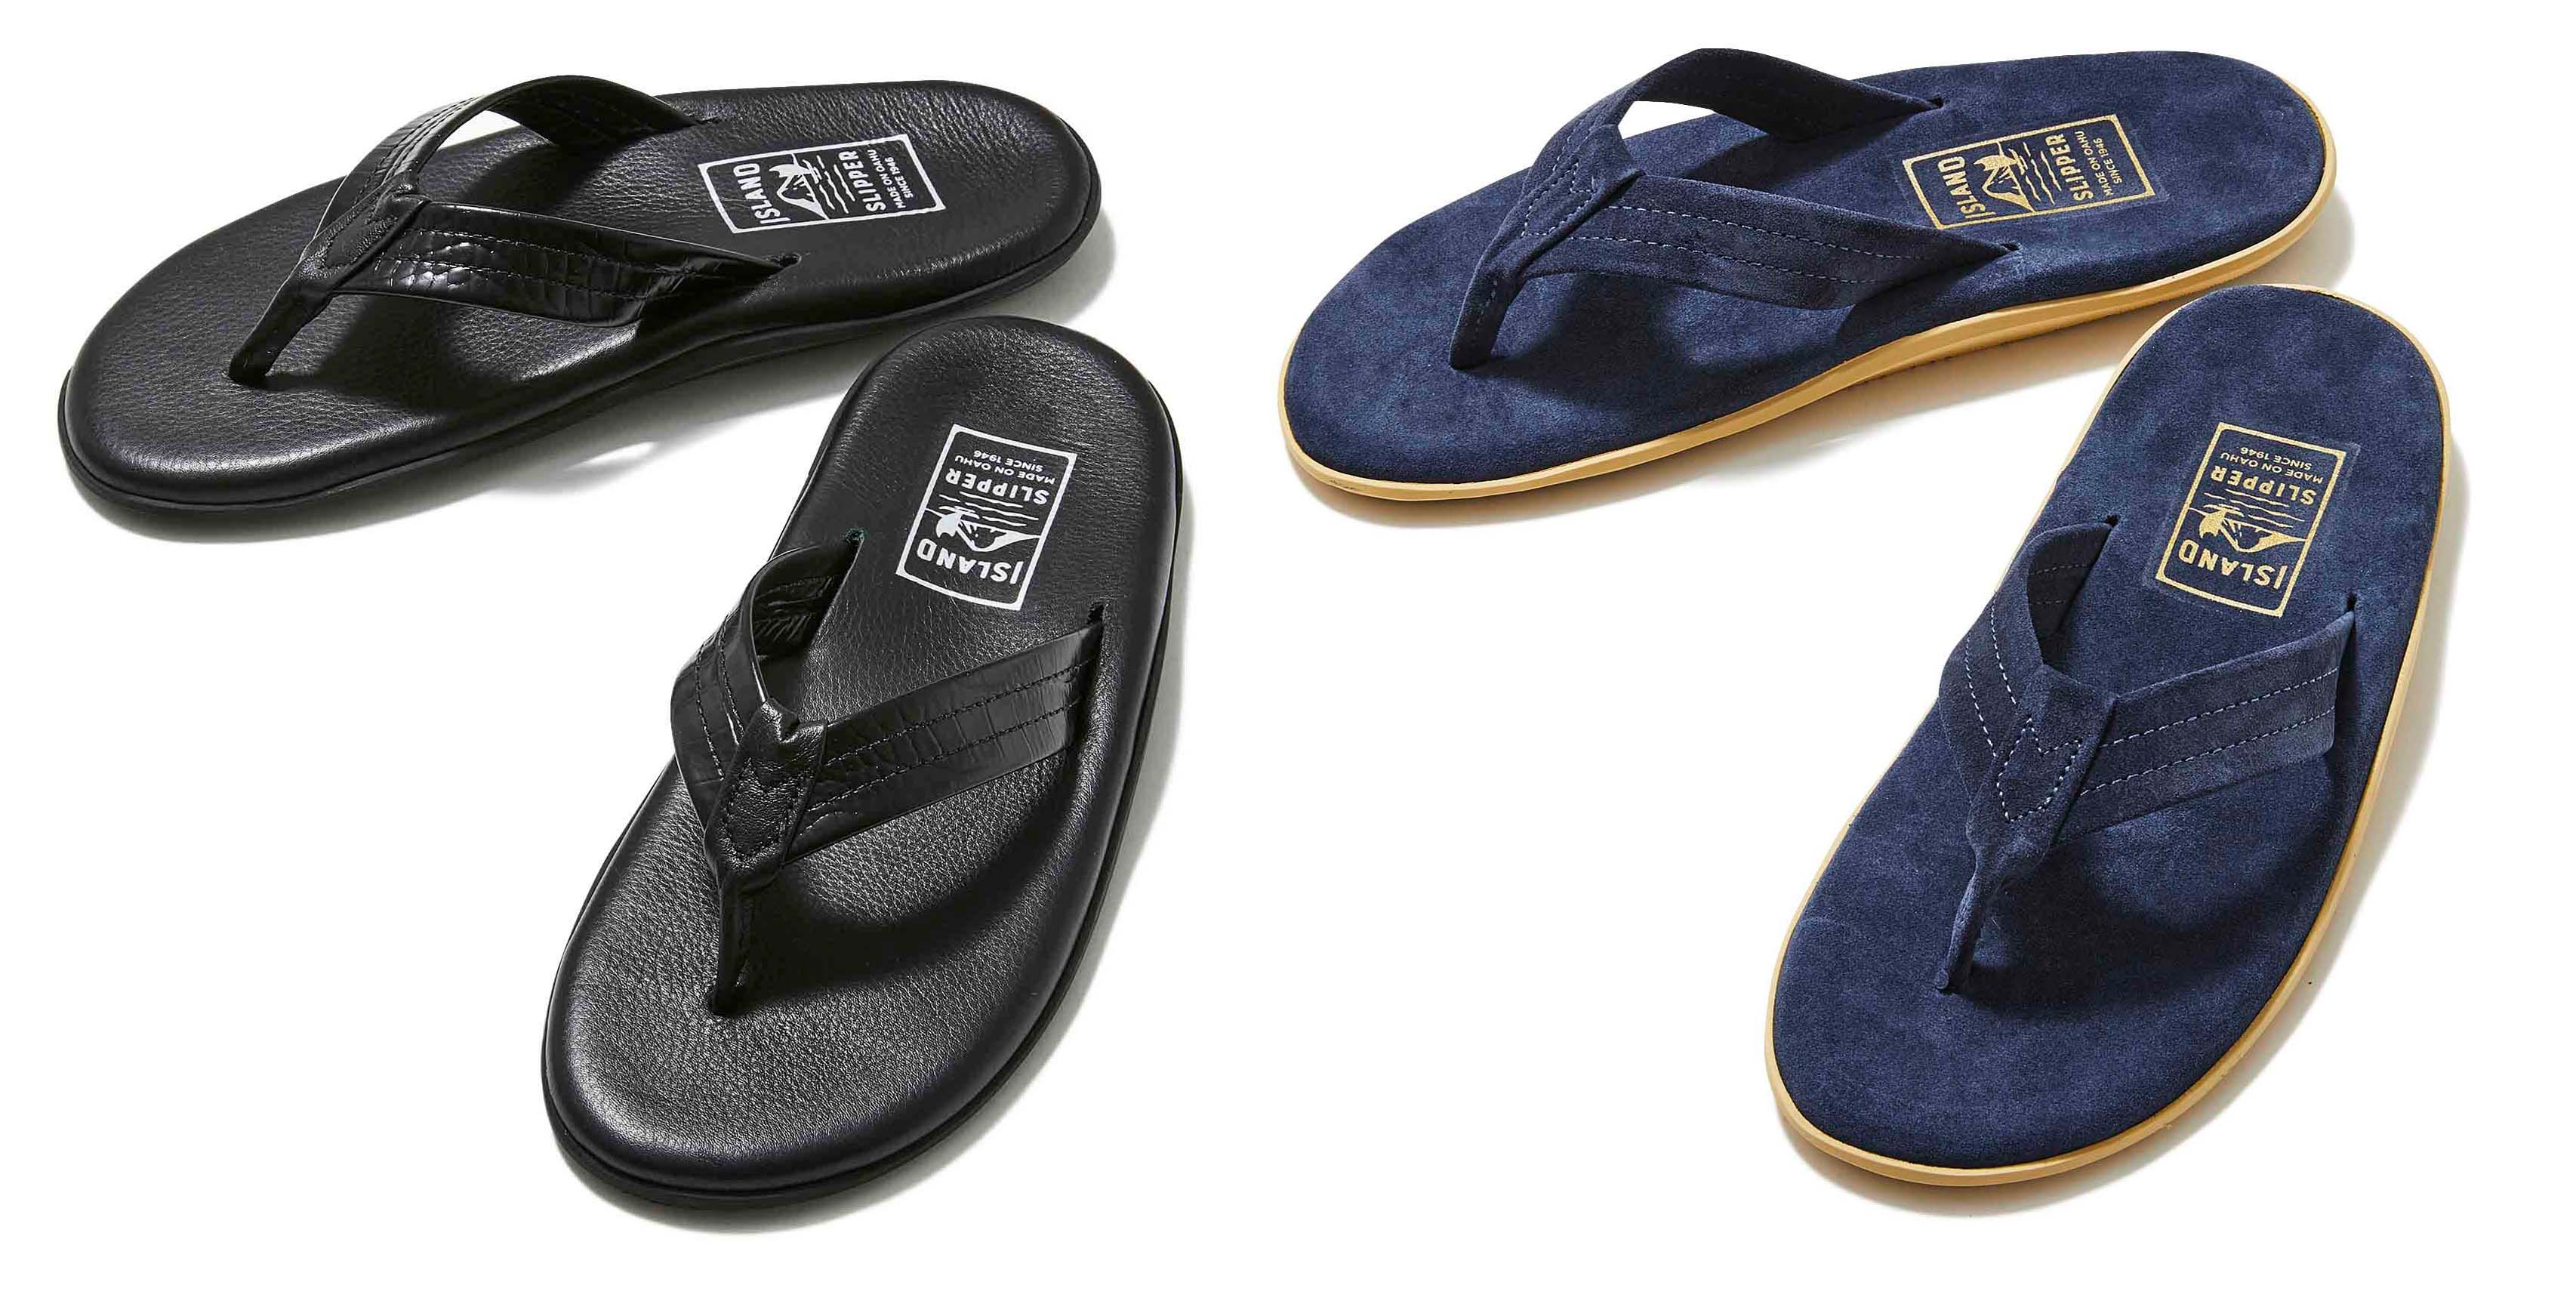 The Hawaiian Sandal Brand 'ISLAND SLIPPER' Traces its Roots to 